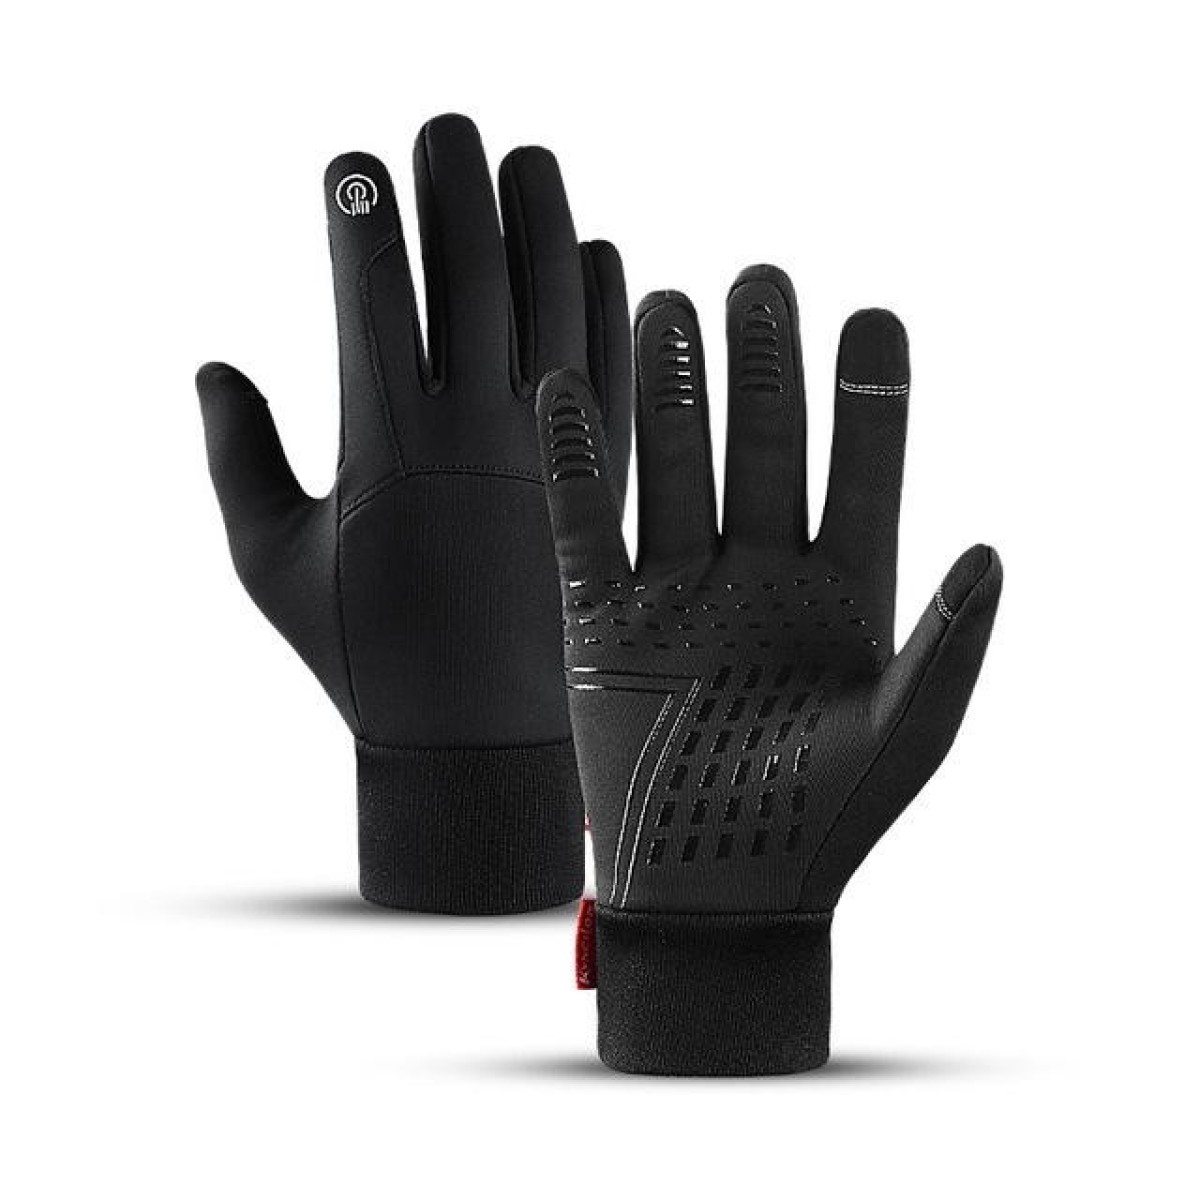 Softshell touchscreen antislip gloves CAMPO CAMPO - view 1